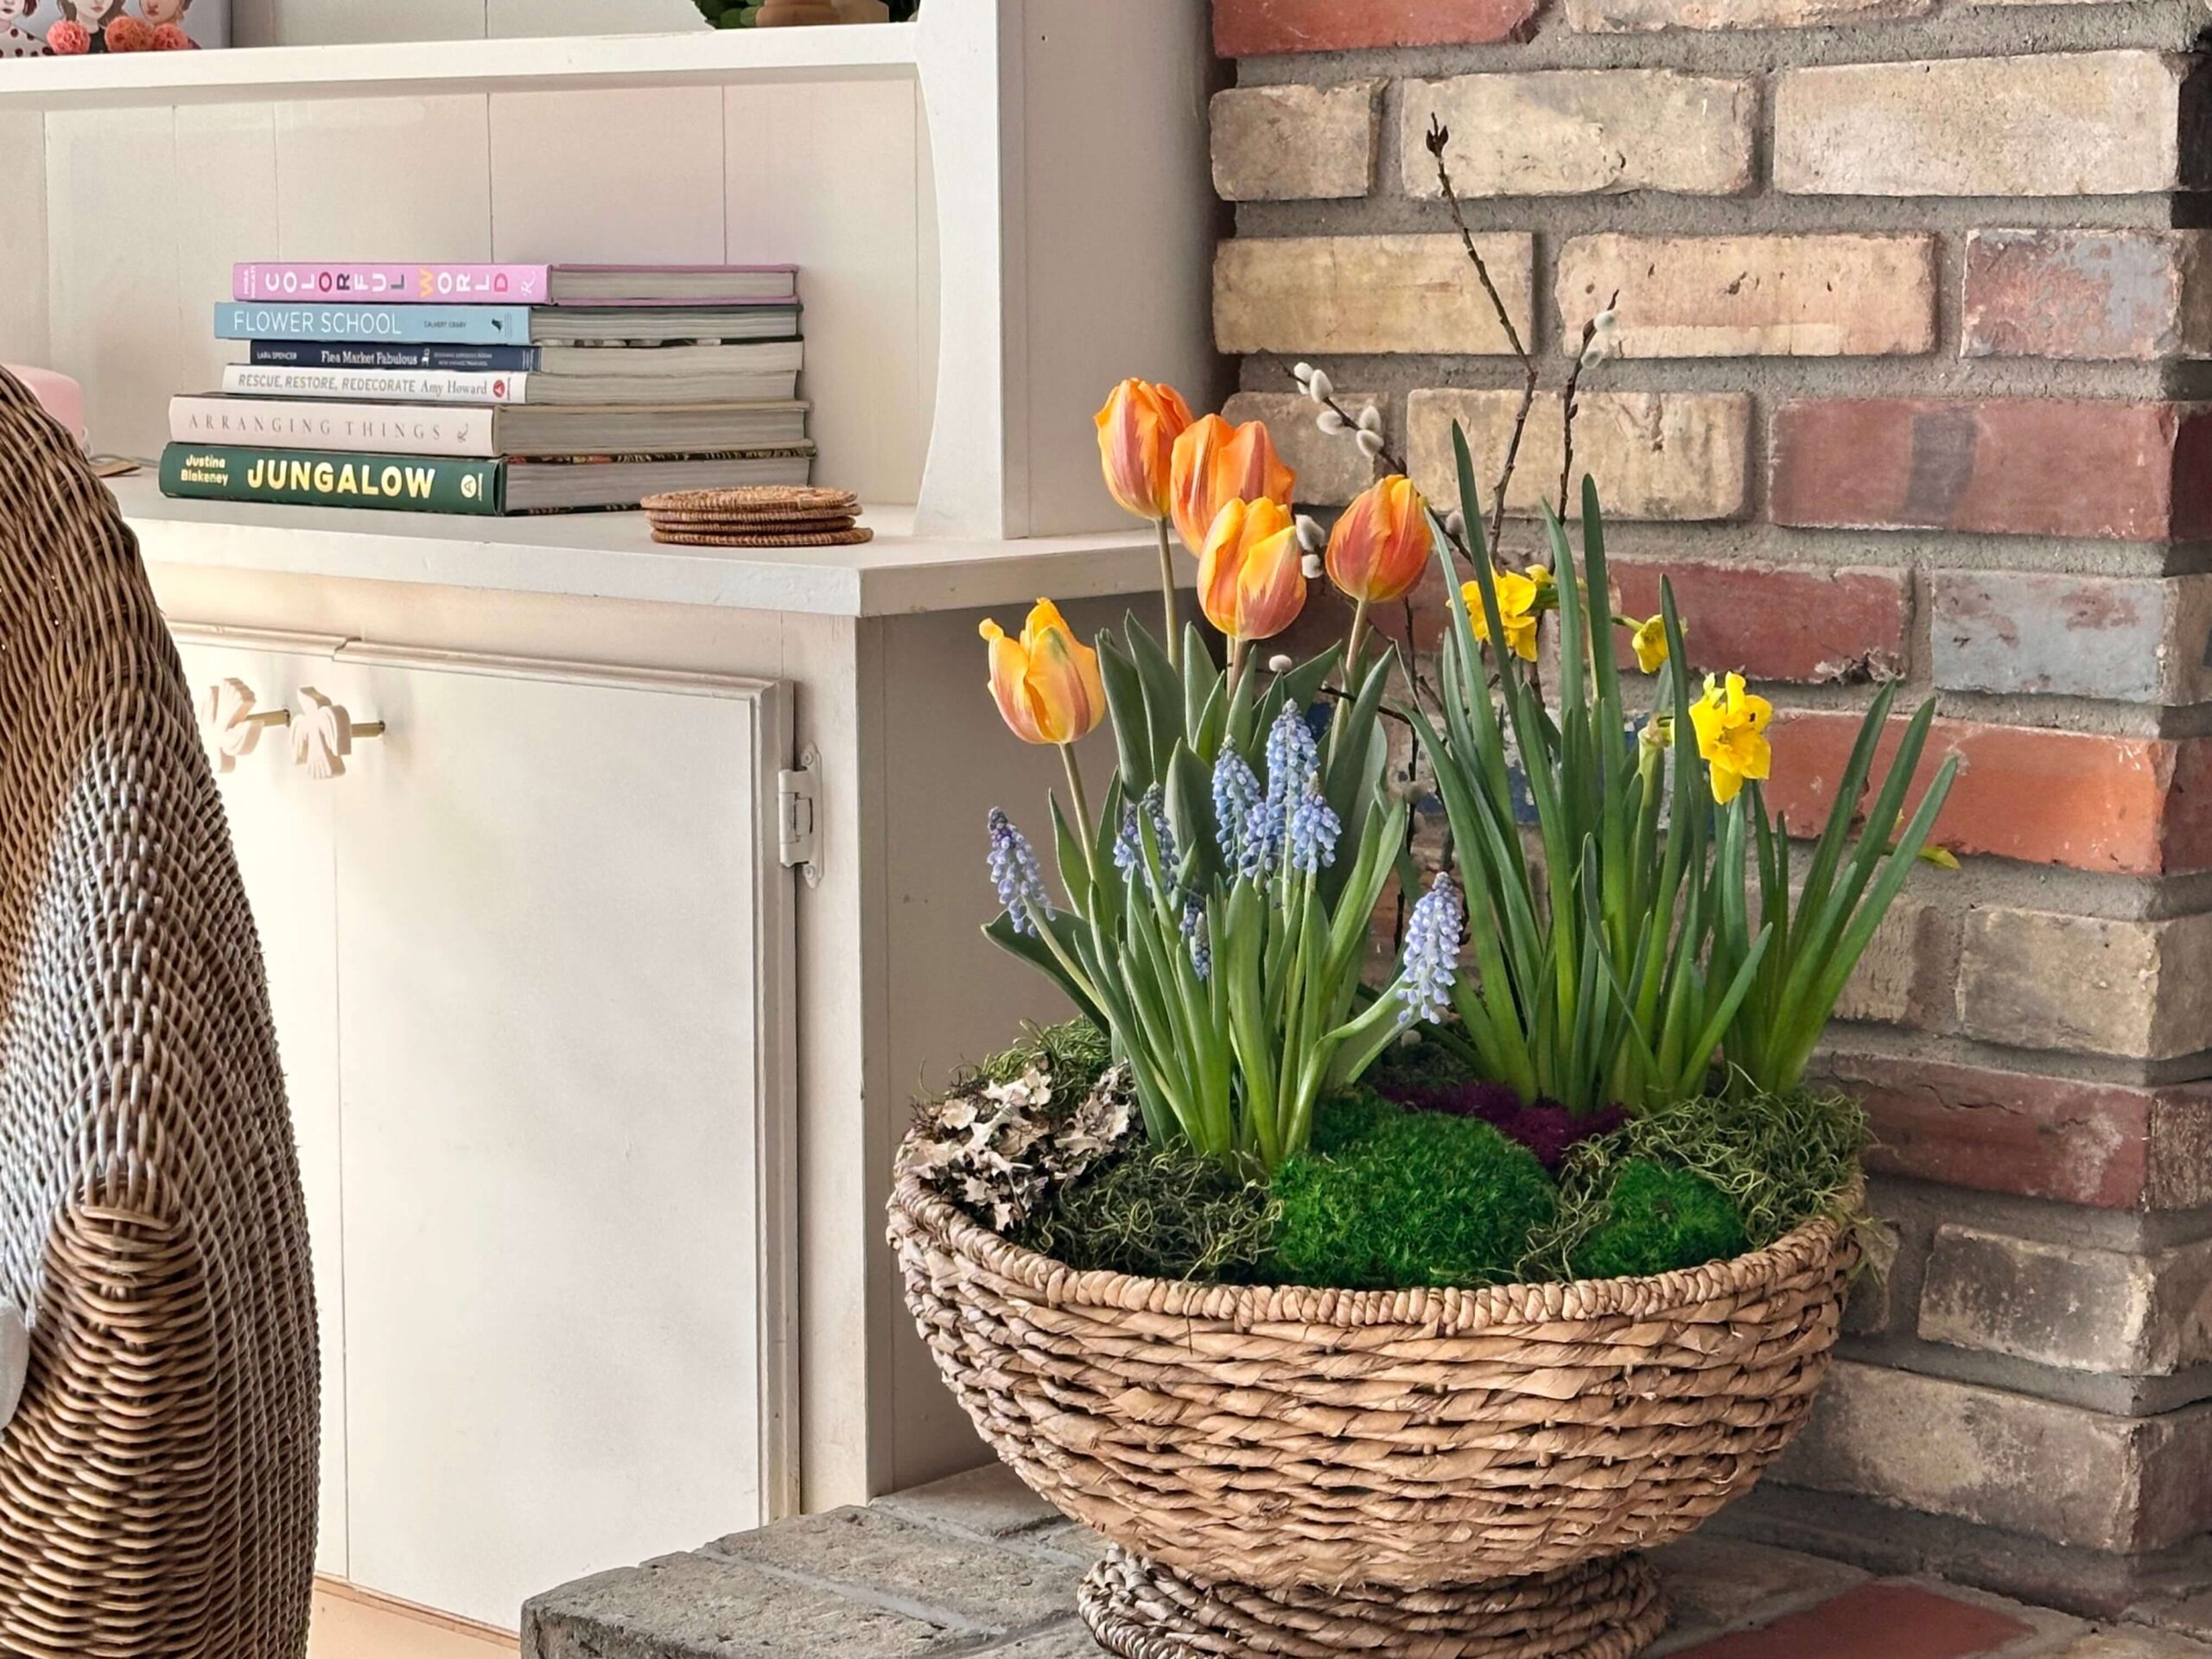 Simple Spring Bulbs in a basket in front of a fireplace.